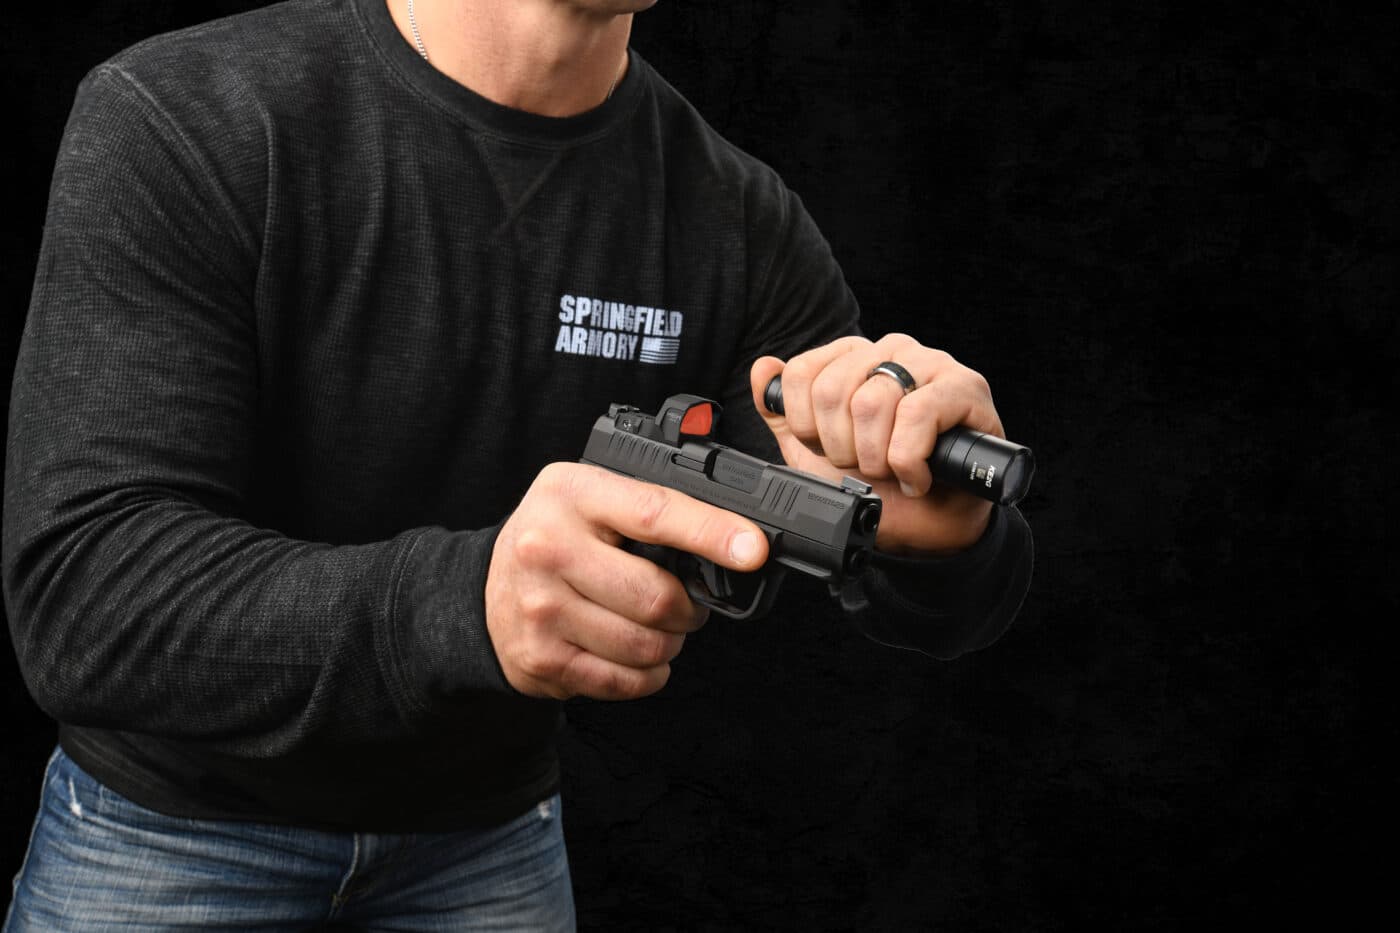 Man demonstrating basic technique of carrying pistol and separate handheld tactical light